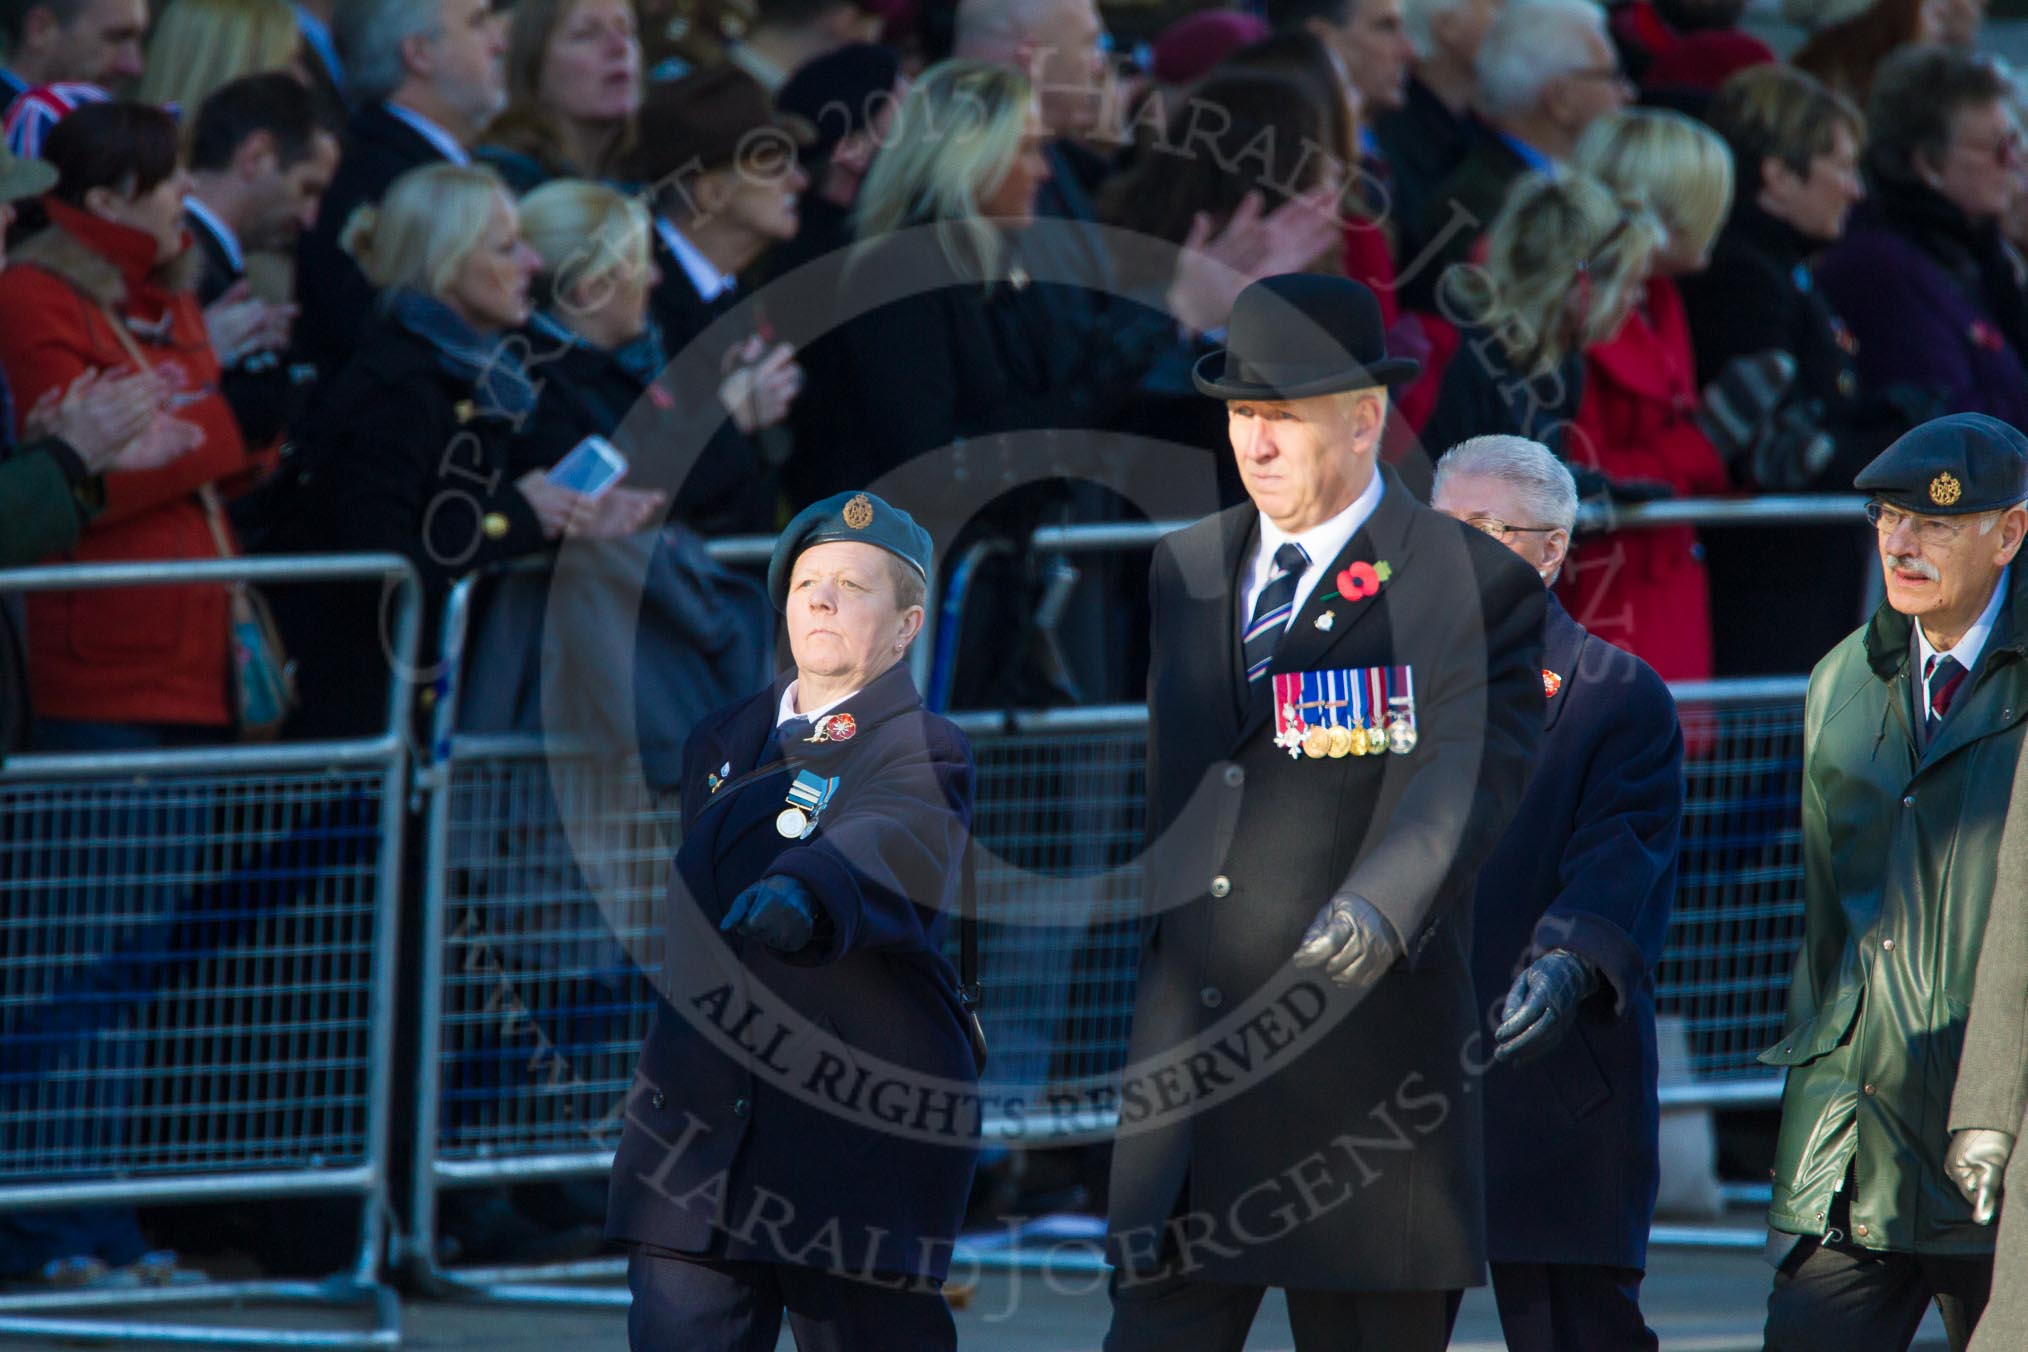 Remembrance Sunday Cenotaph March Past 2013: C1 - Royal Air Forces Association..
Press stand opposite the Foreign Office building, Whitehall, London SW1,
London,
Greater London,
United Kingdom,
on 10 November 2013 at 12:05, image #1646